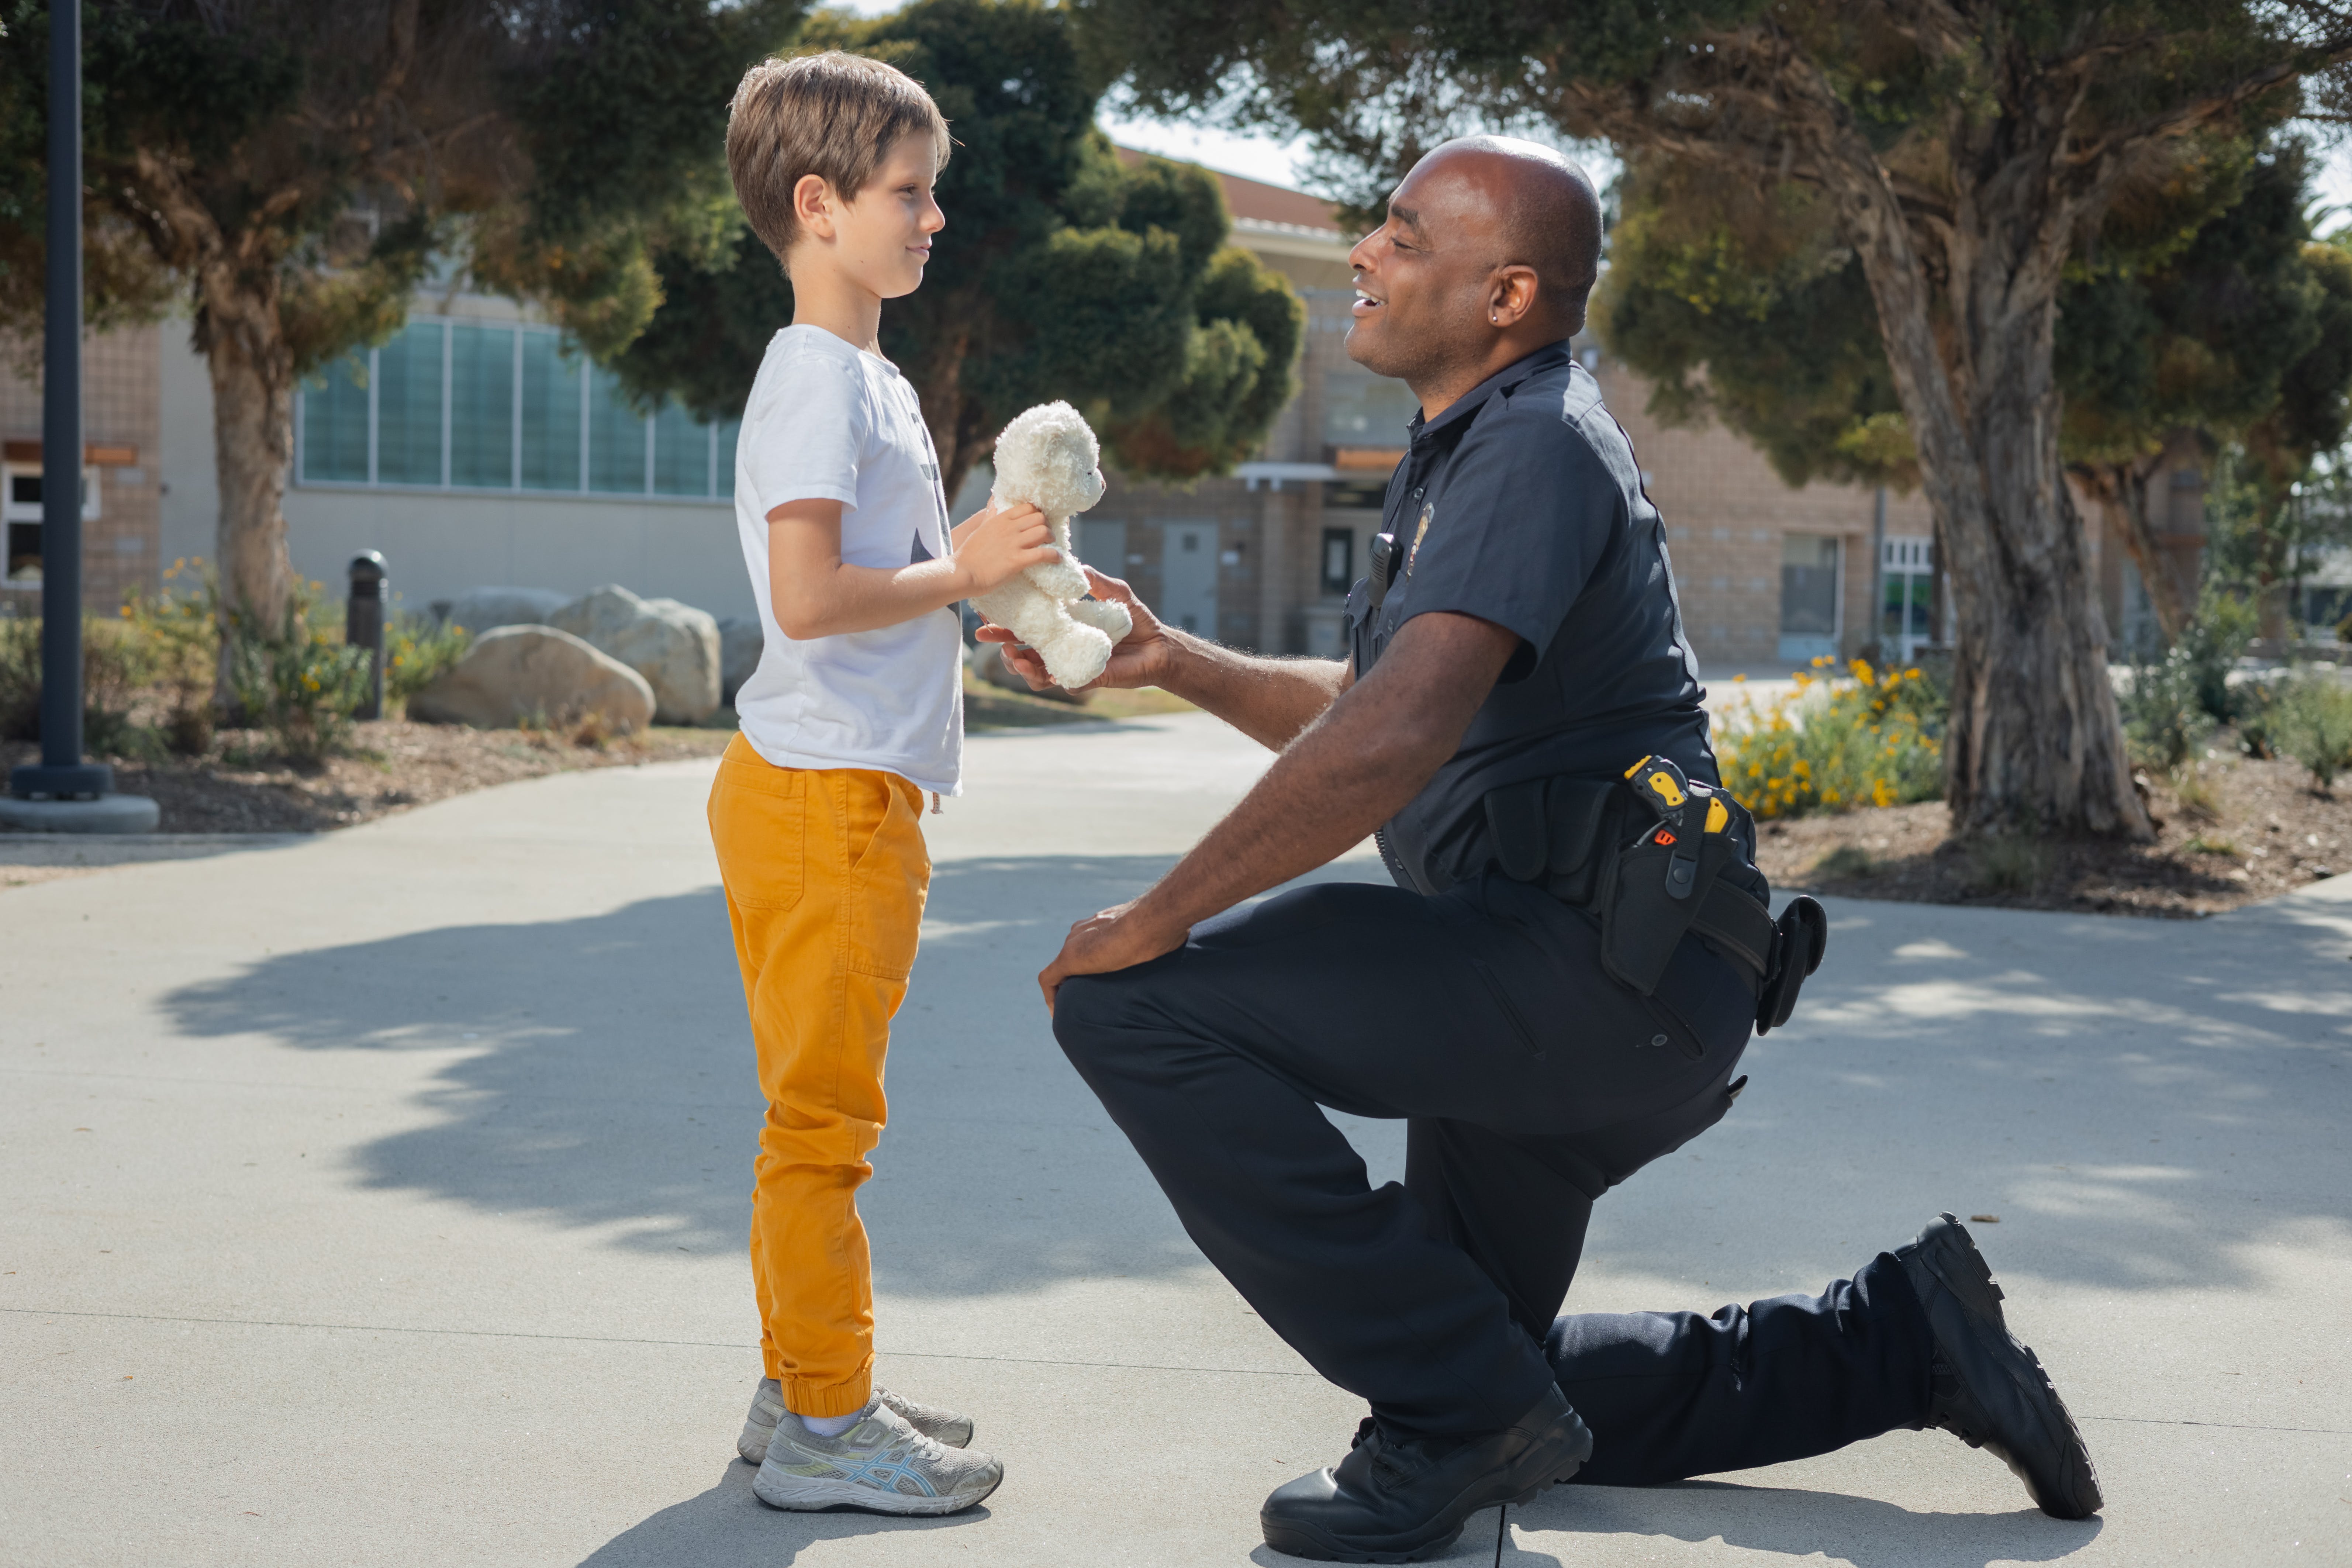 Police officer talks to 7 years old boy | Source: Pexels.com